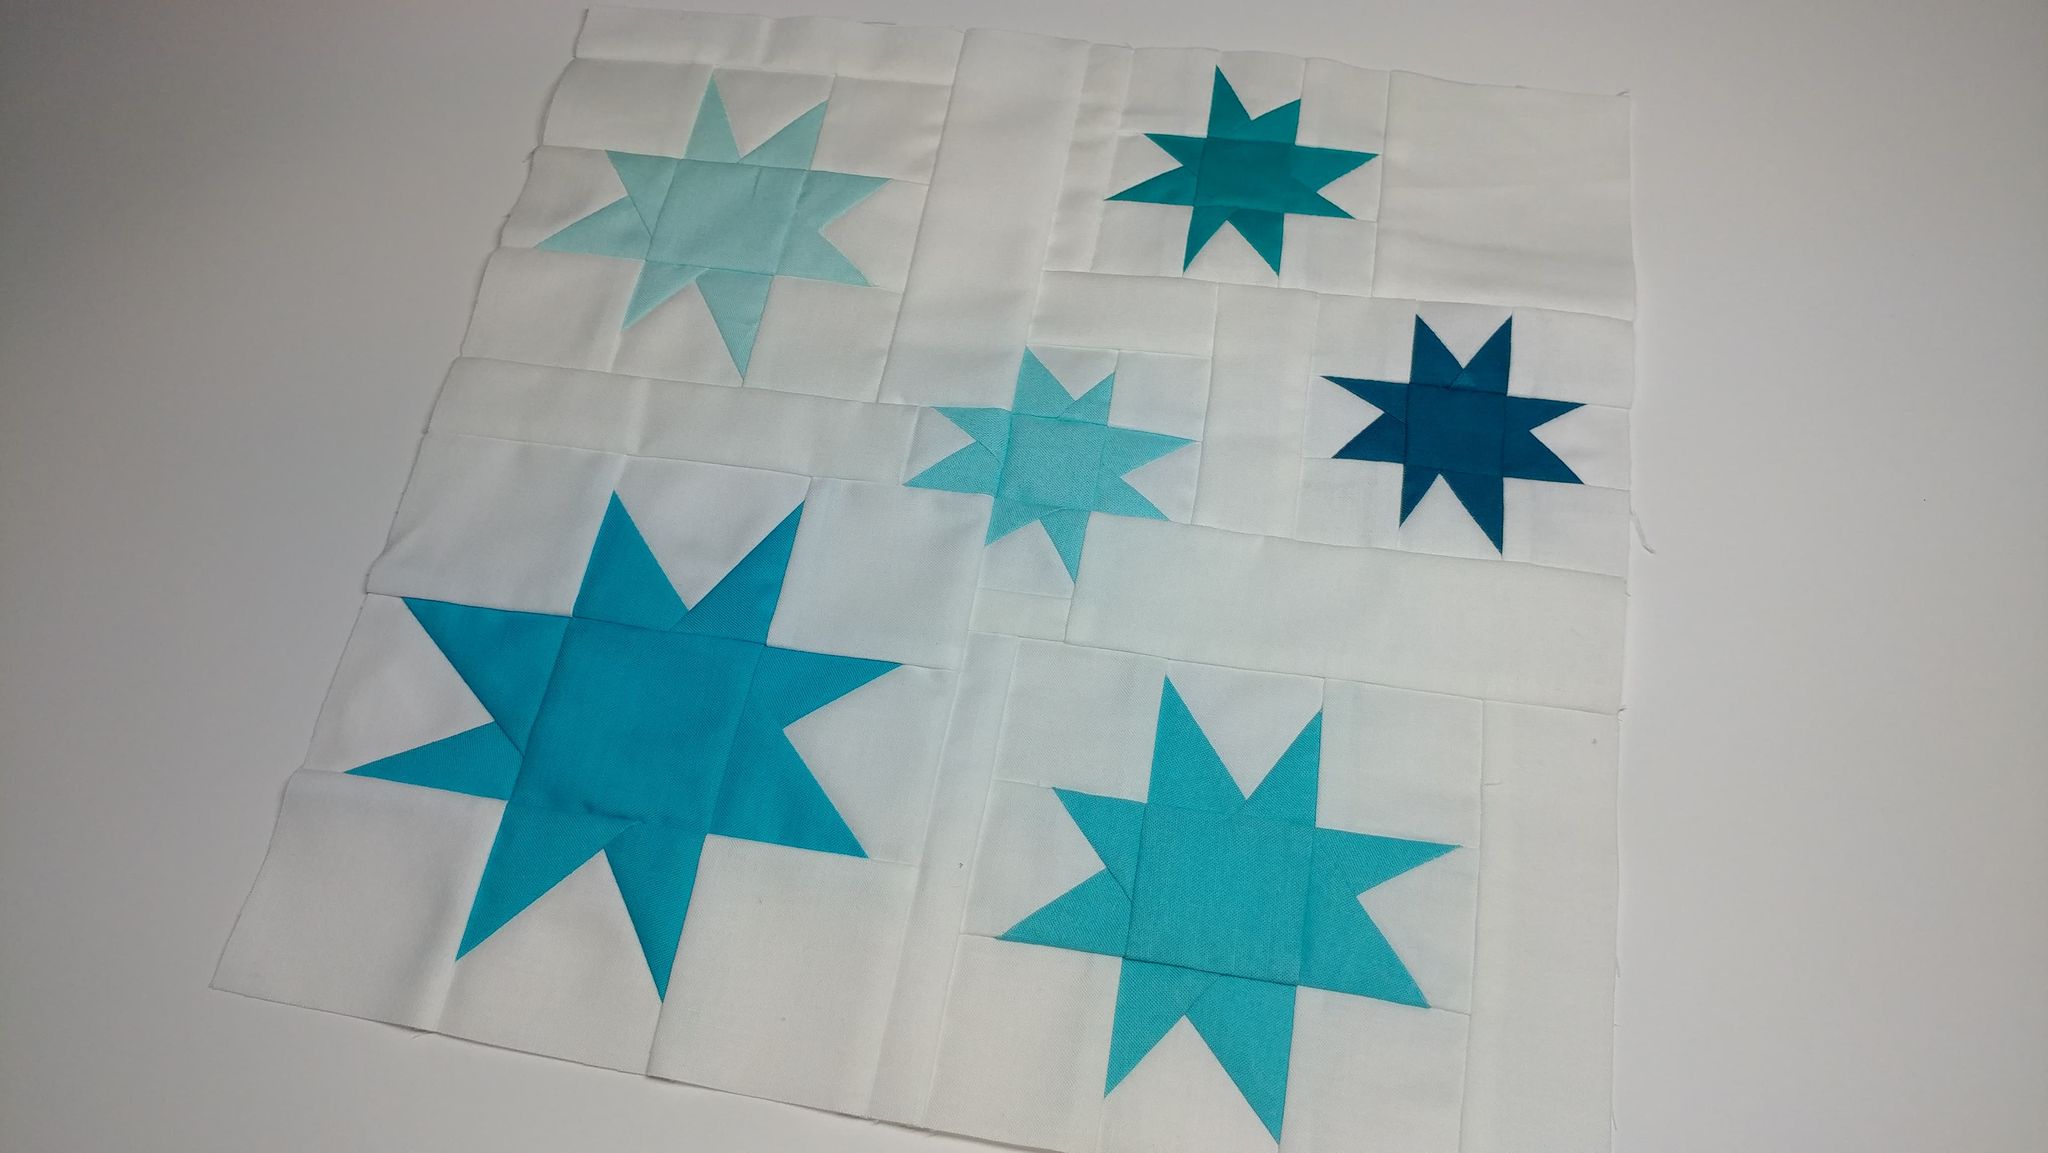 QAL by the Sea Annoucement! – Powered By Quilting